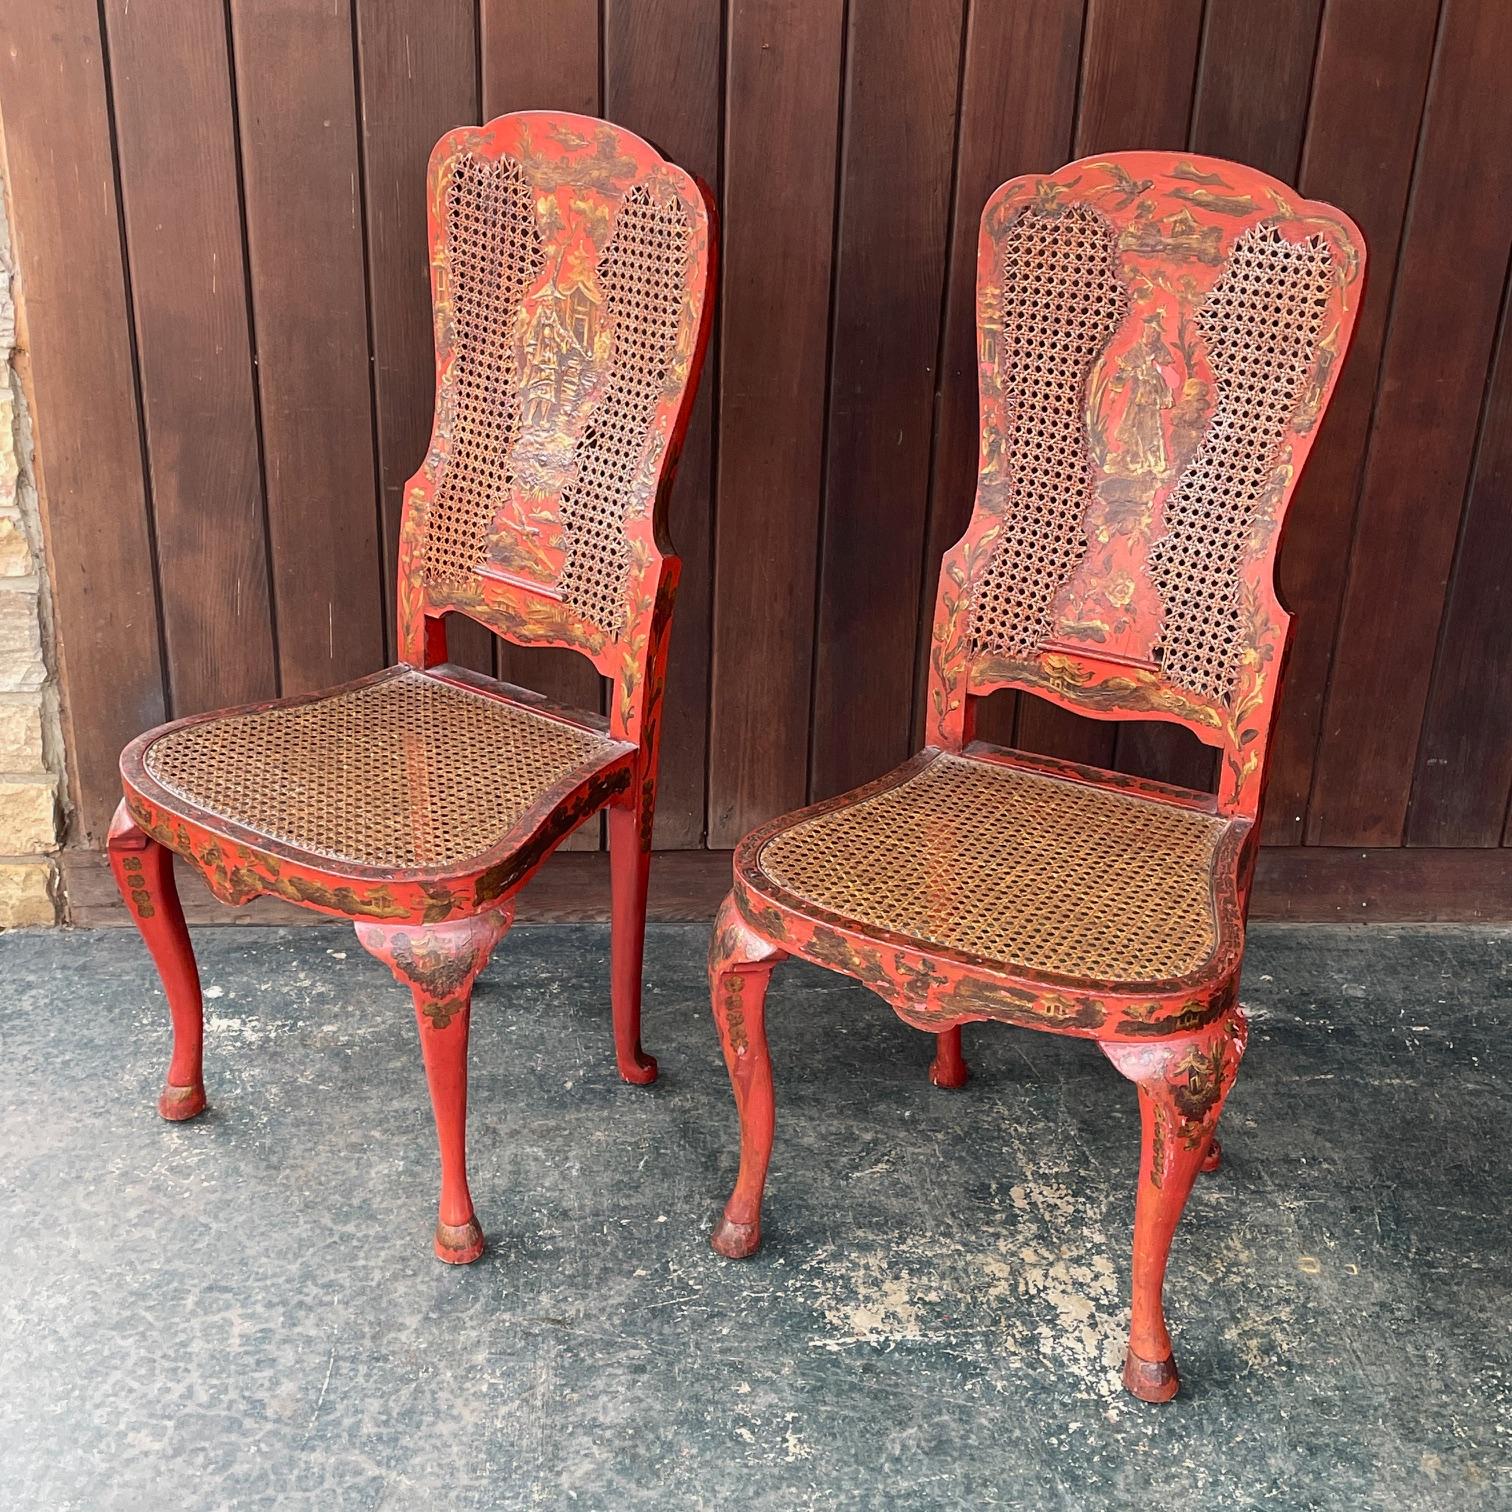 19th Century English Queen Anne Red Lacquered Chinoiserie Accent Chairs. Caning is unbroken but we have not sat in these chairs to test its strength.
W 21 x D 21.5 x Seat H 17.75 / Back H 42.75 in

Pick up in Hillandale MD 20903 USA. We have a